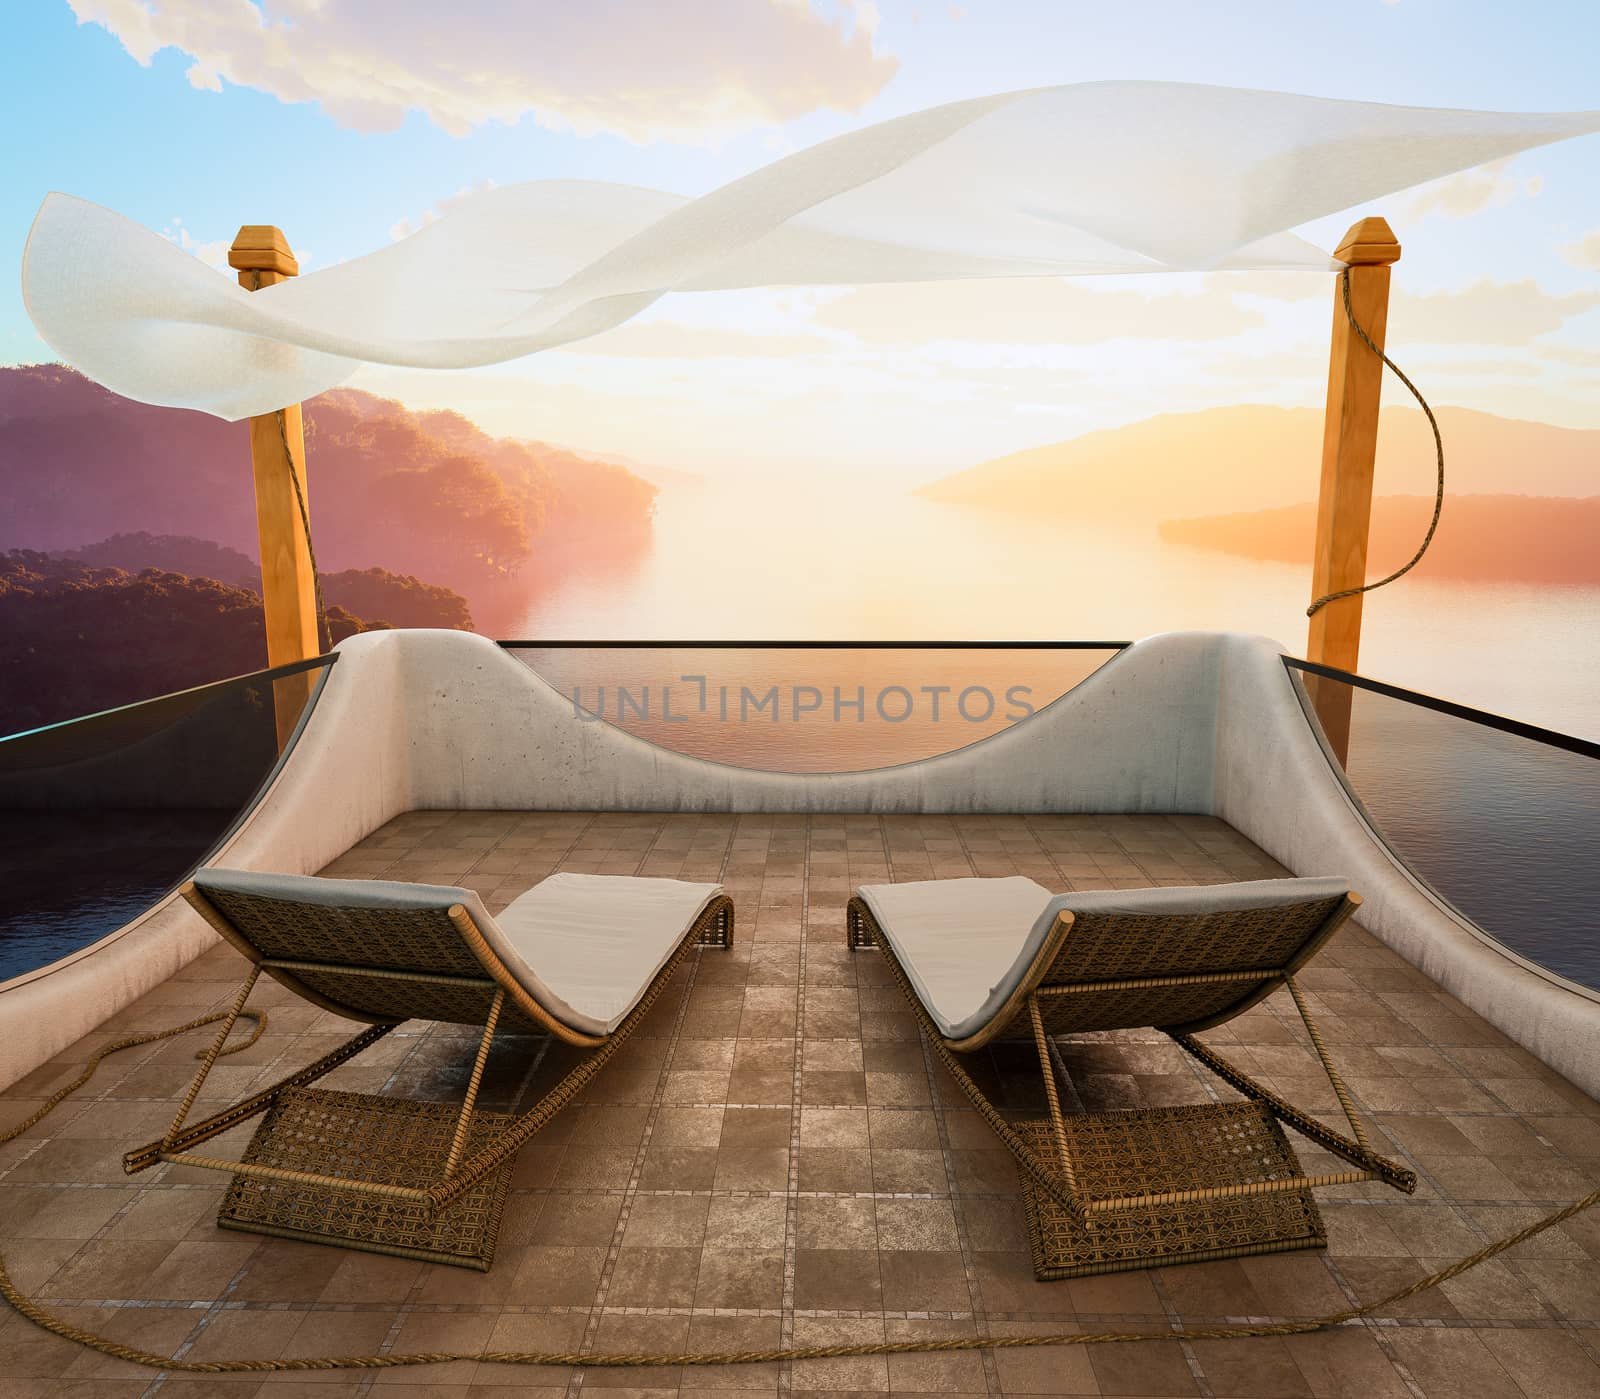 Balcony with Sea Views and two chairs vacation concept